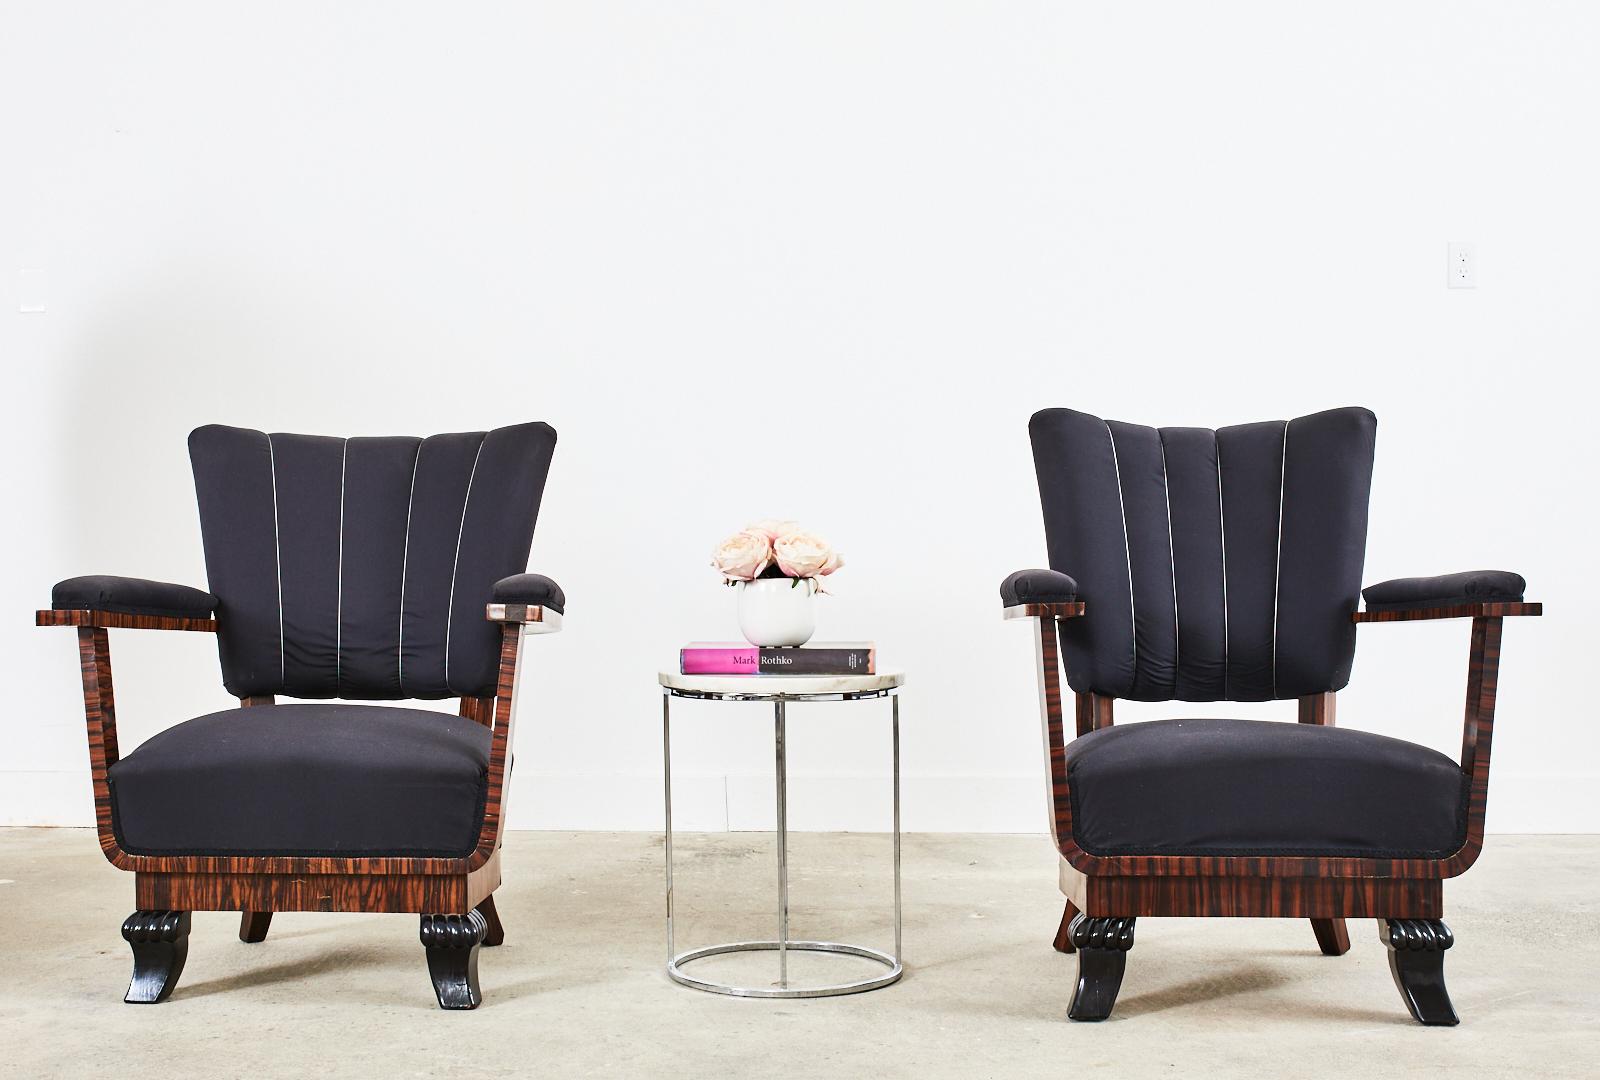 Fantastic near pair of French Art Deco period armchairs featuring a unique architectural open design with 